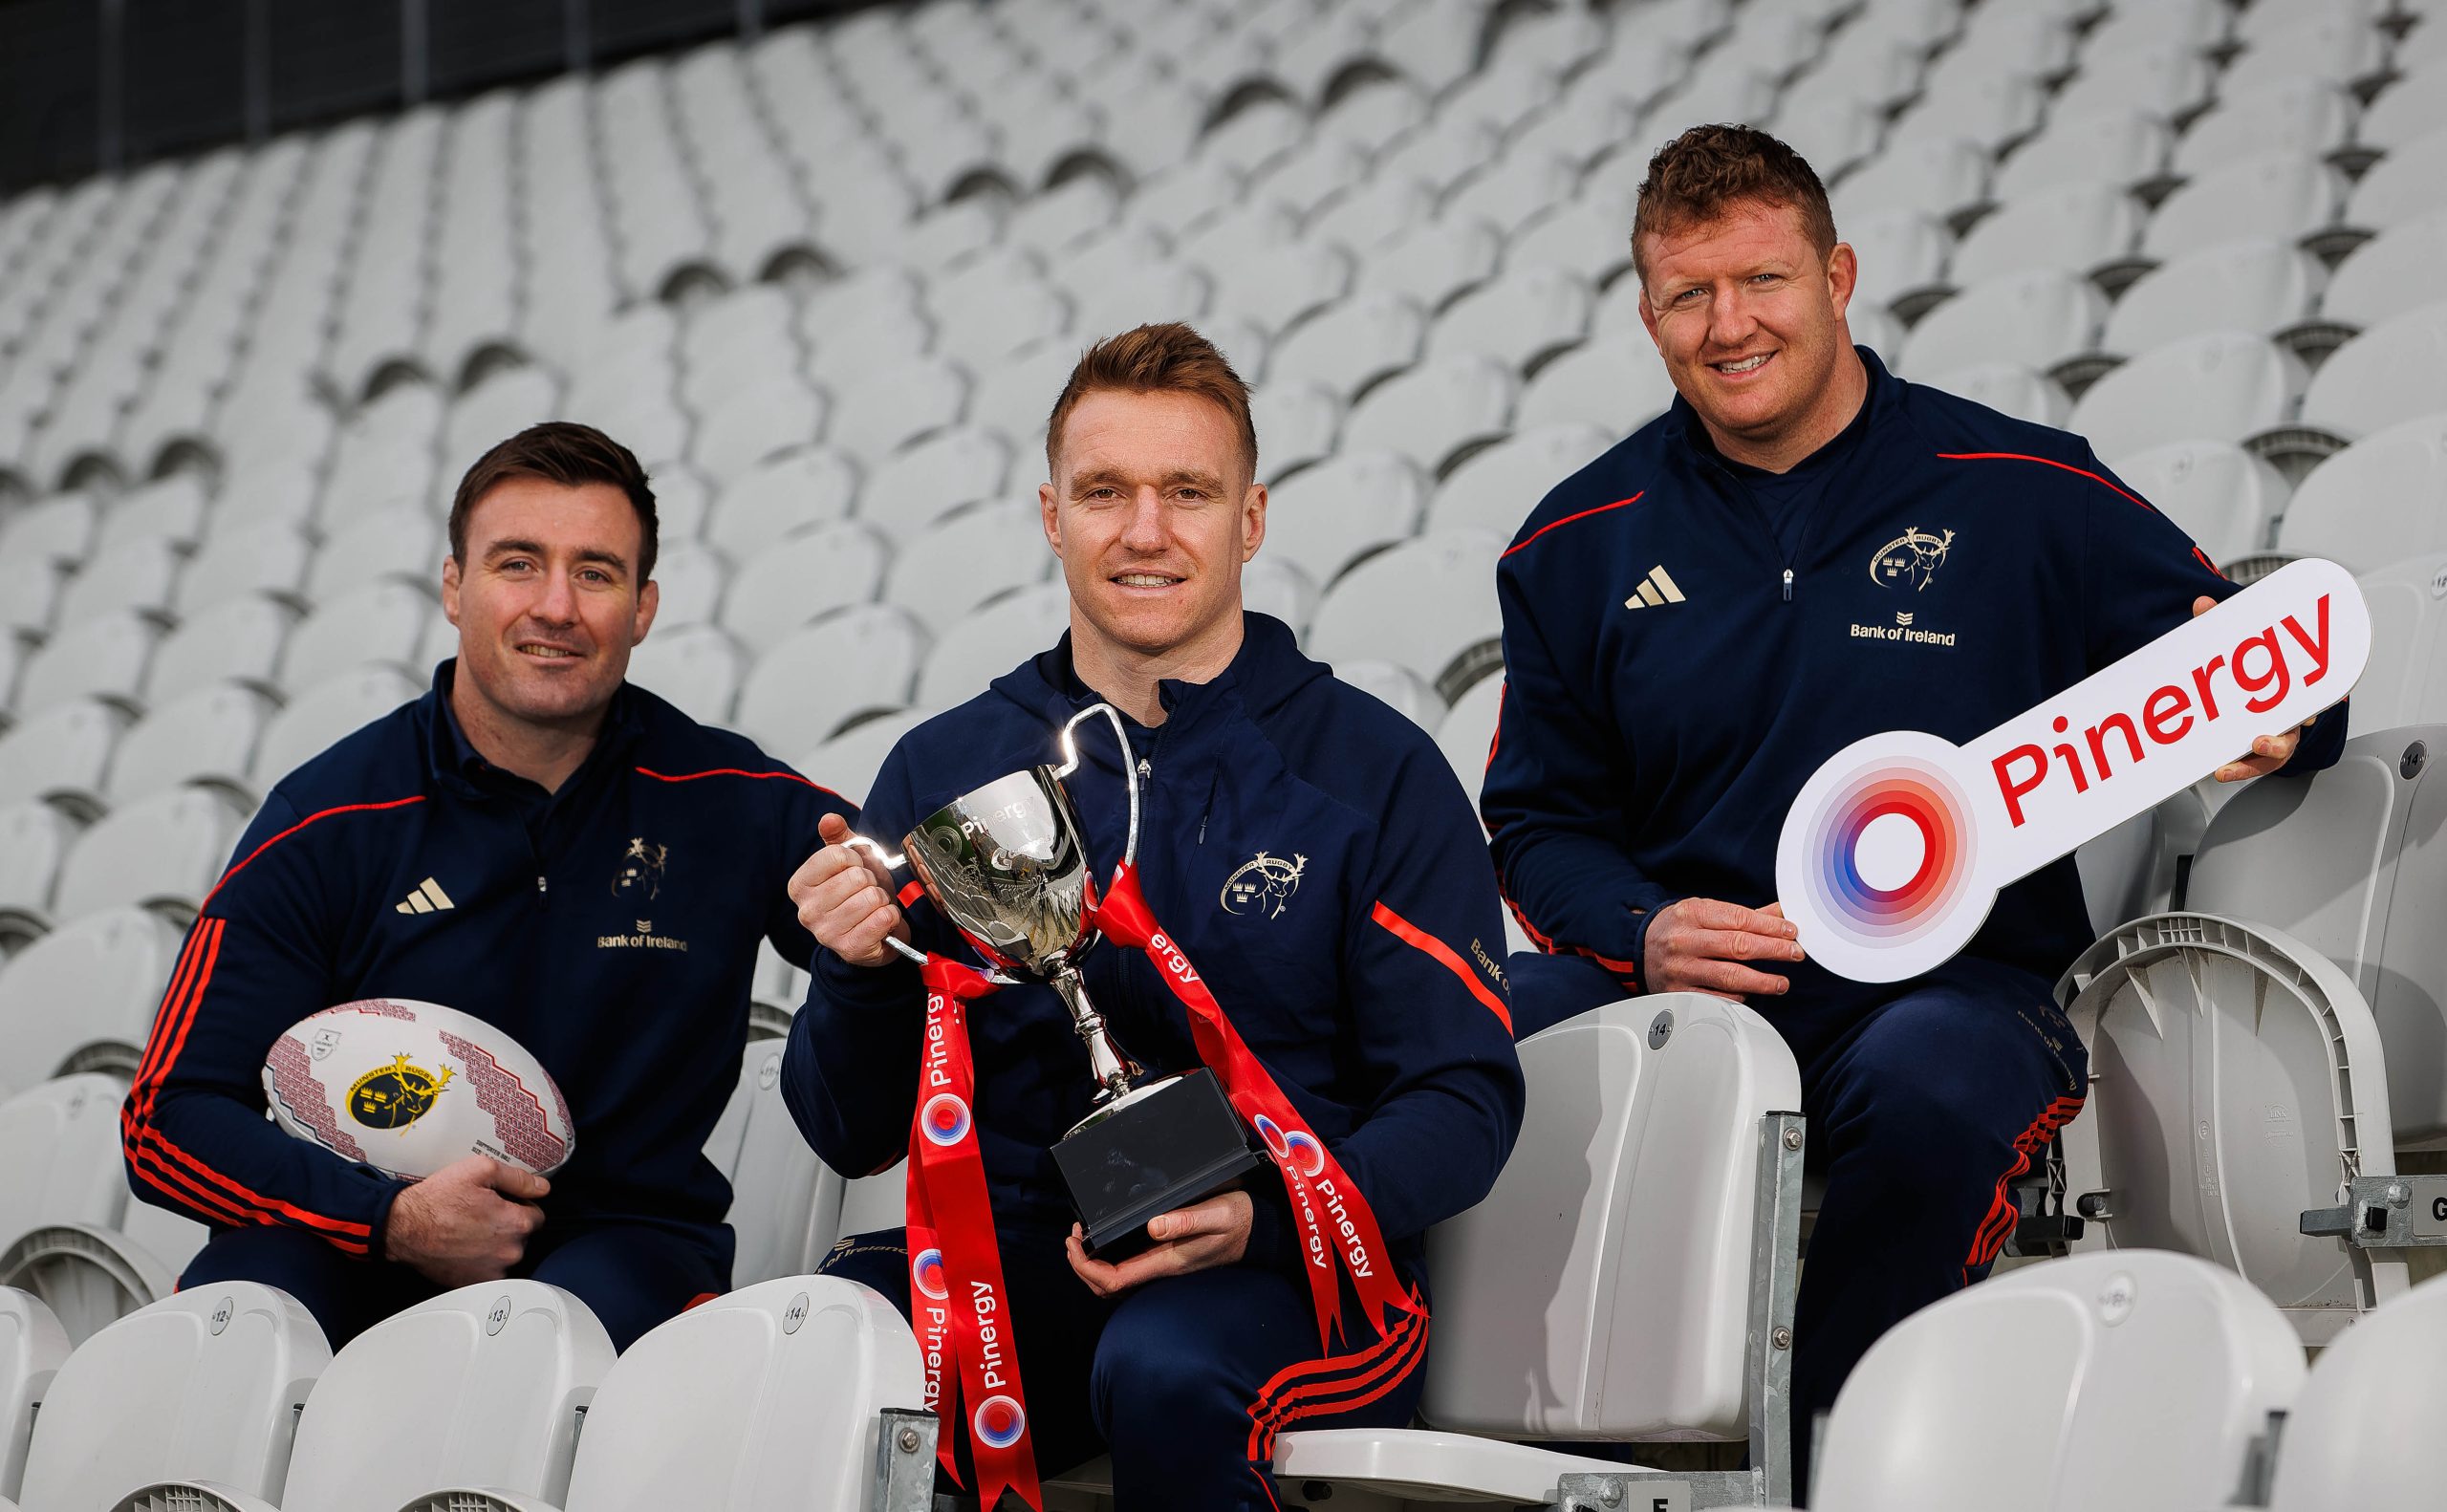 Pinergy calling on Munster fans to turn the Pairc red this Saturday